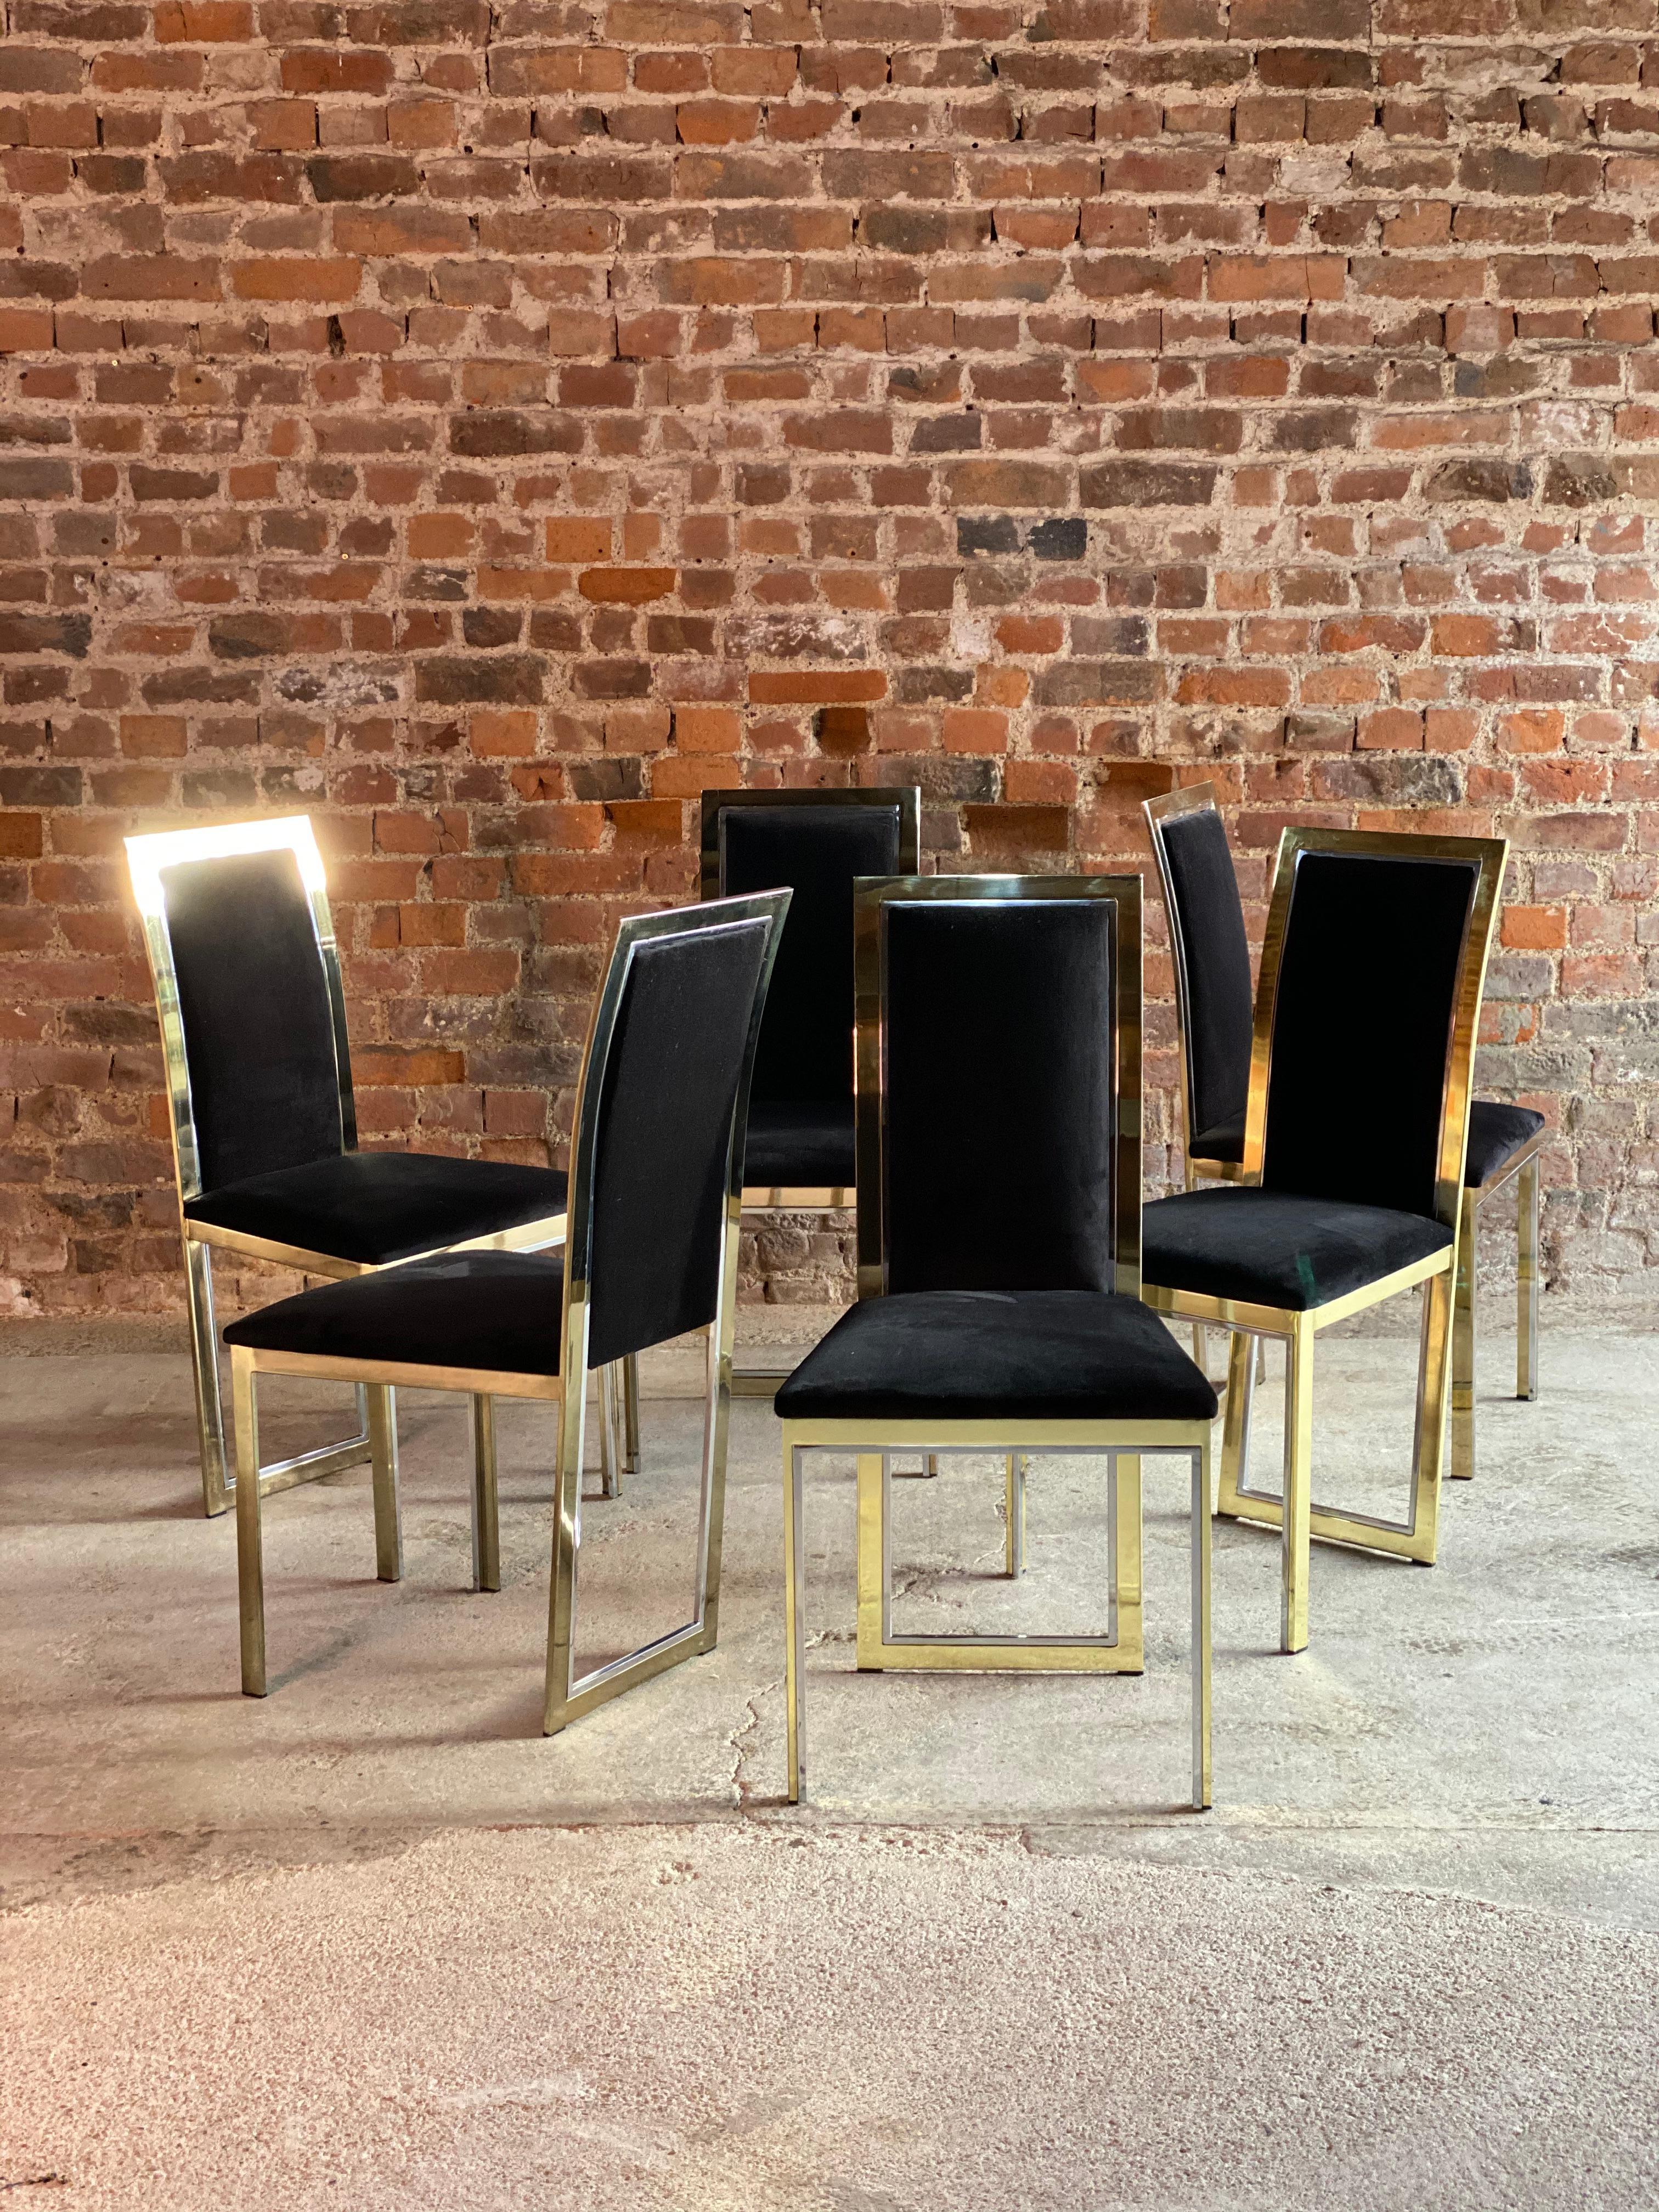 Romeo Rega brass and chrome dining chairs set of six Italy circa 1970s

Romeo Rega, a magnificent set of six dining chairs circa 1970s, in chrome-plated steel and brass, with black velvet upholstery, the chairs were retailed and purchased from